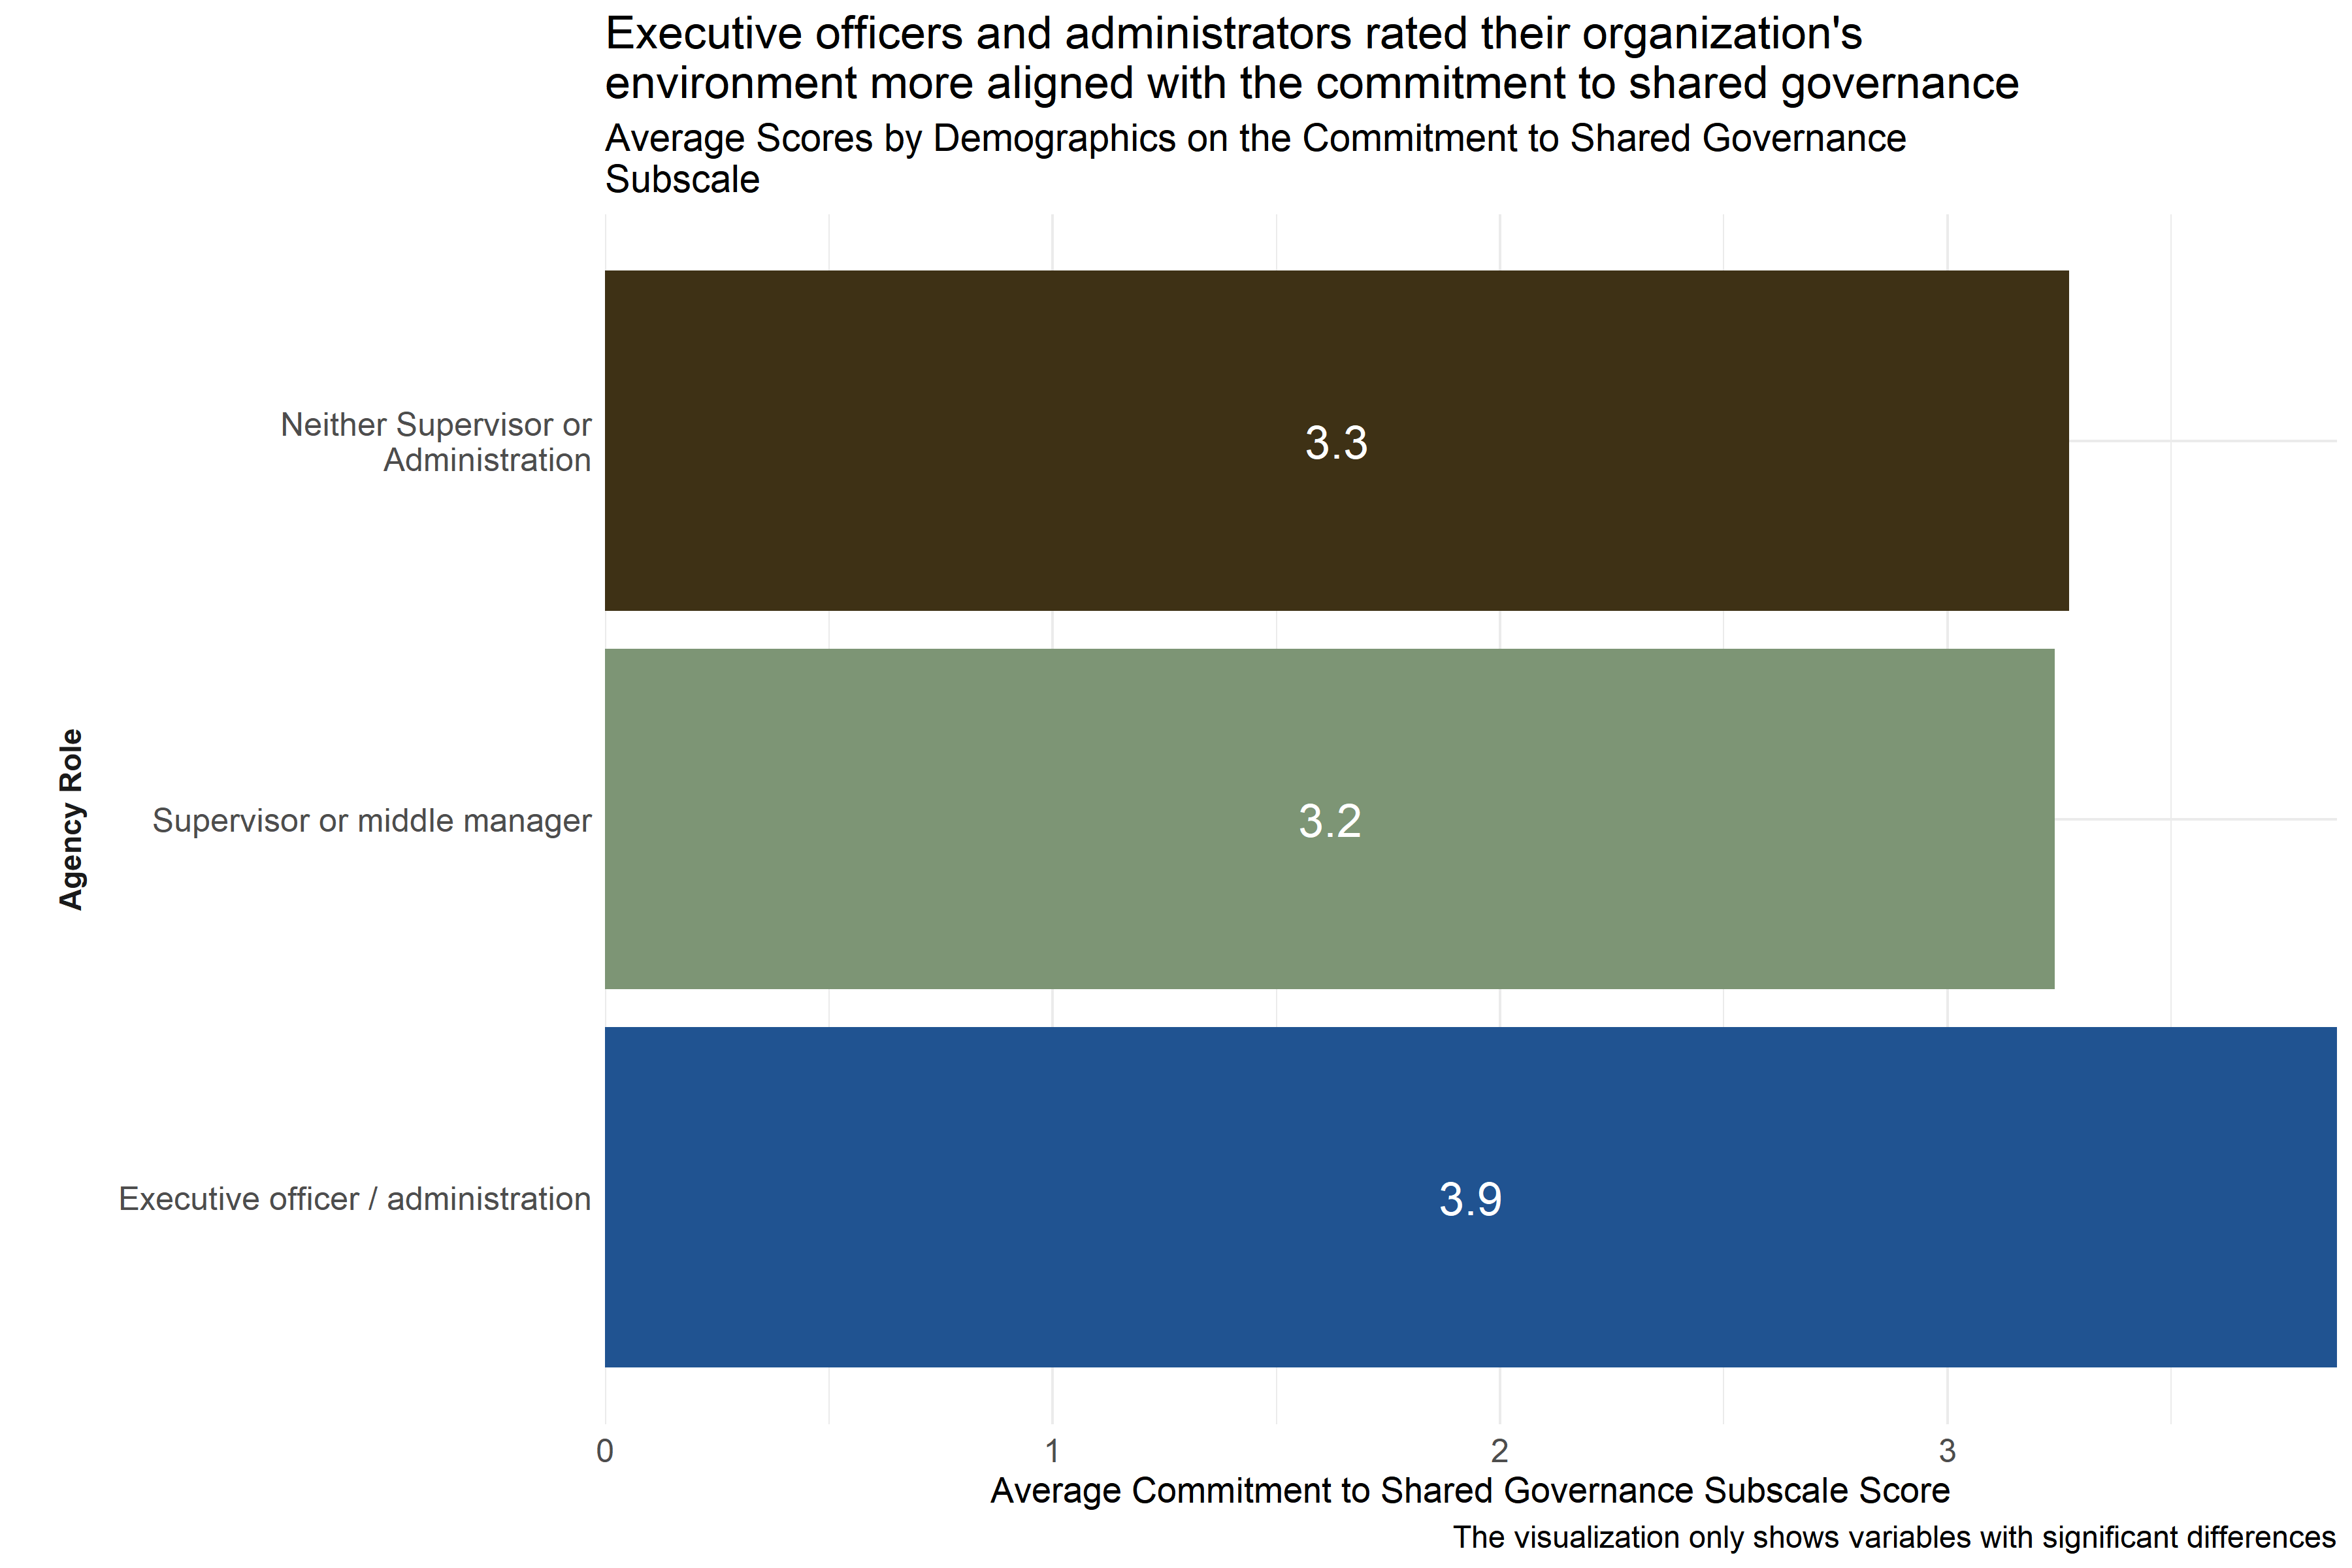 Average scores for Commitment to Shared Governance
Subscale across demographic groups